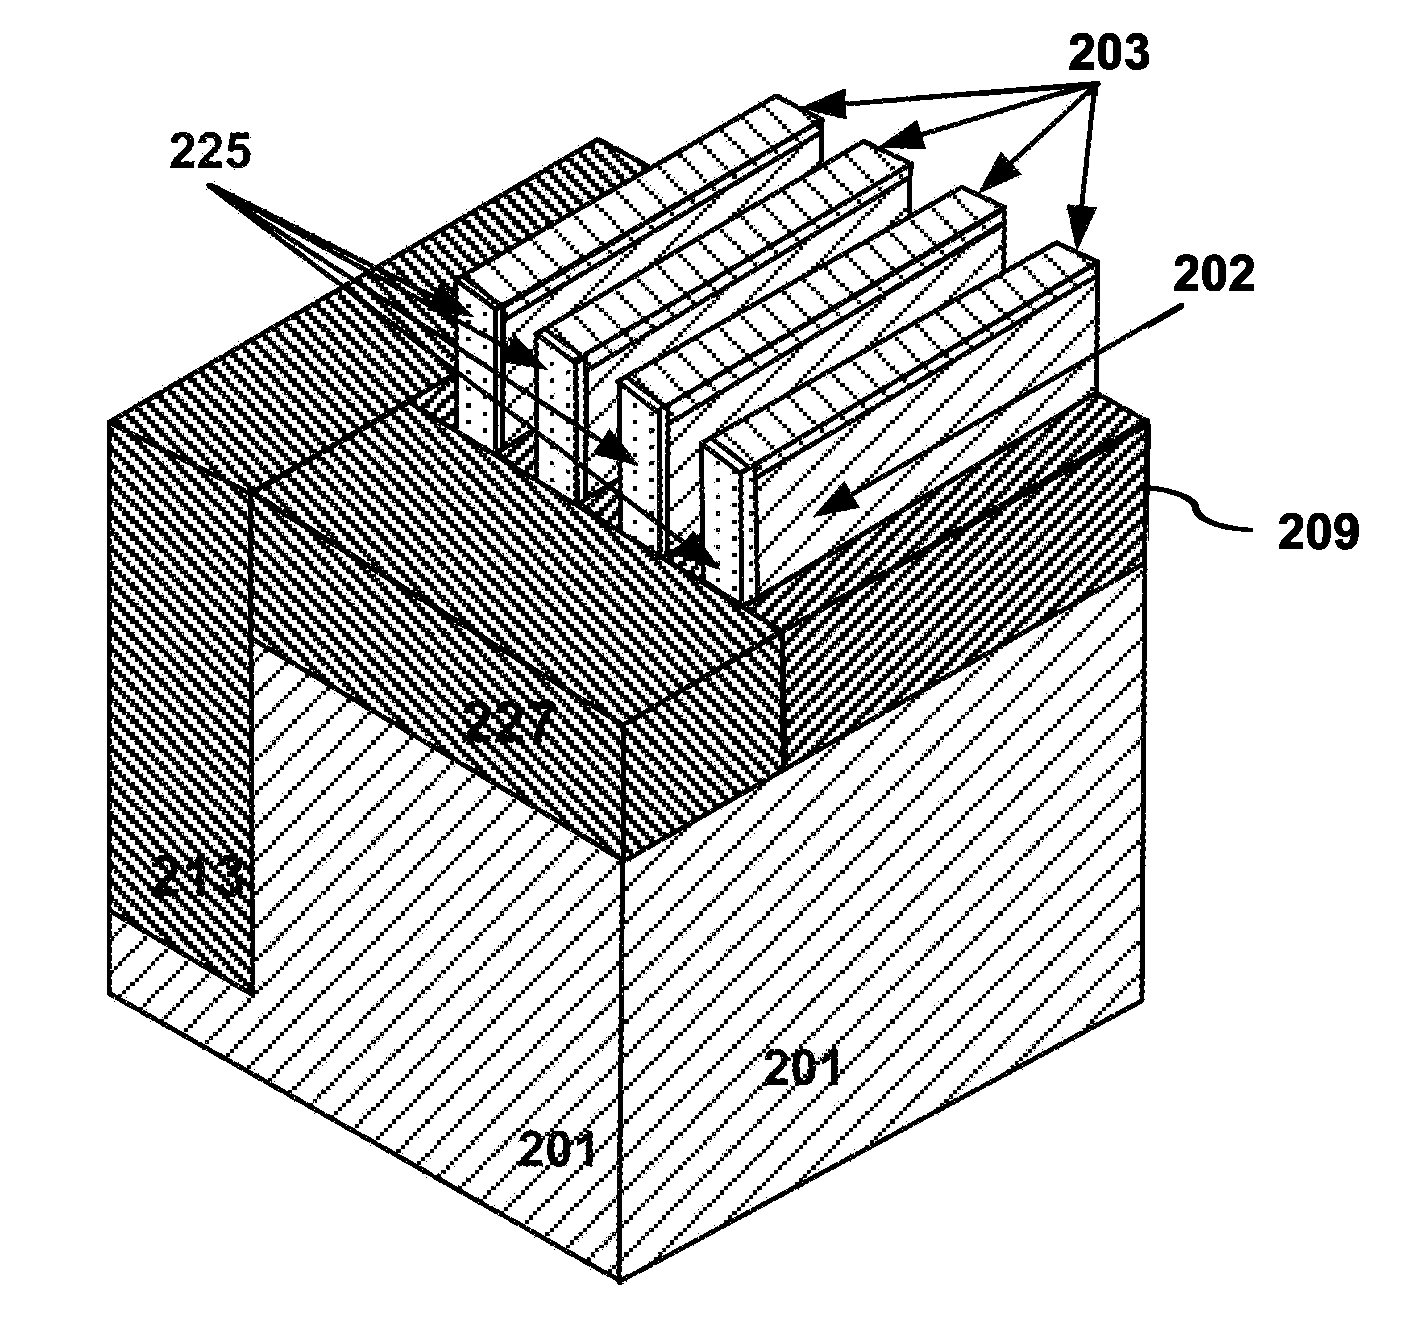 Method to prevent lateral epitaxial growth in semiconductor devices